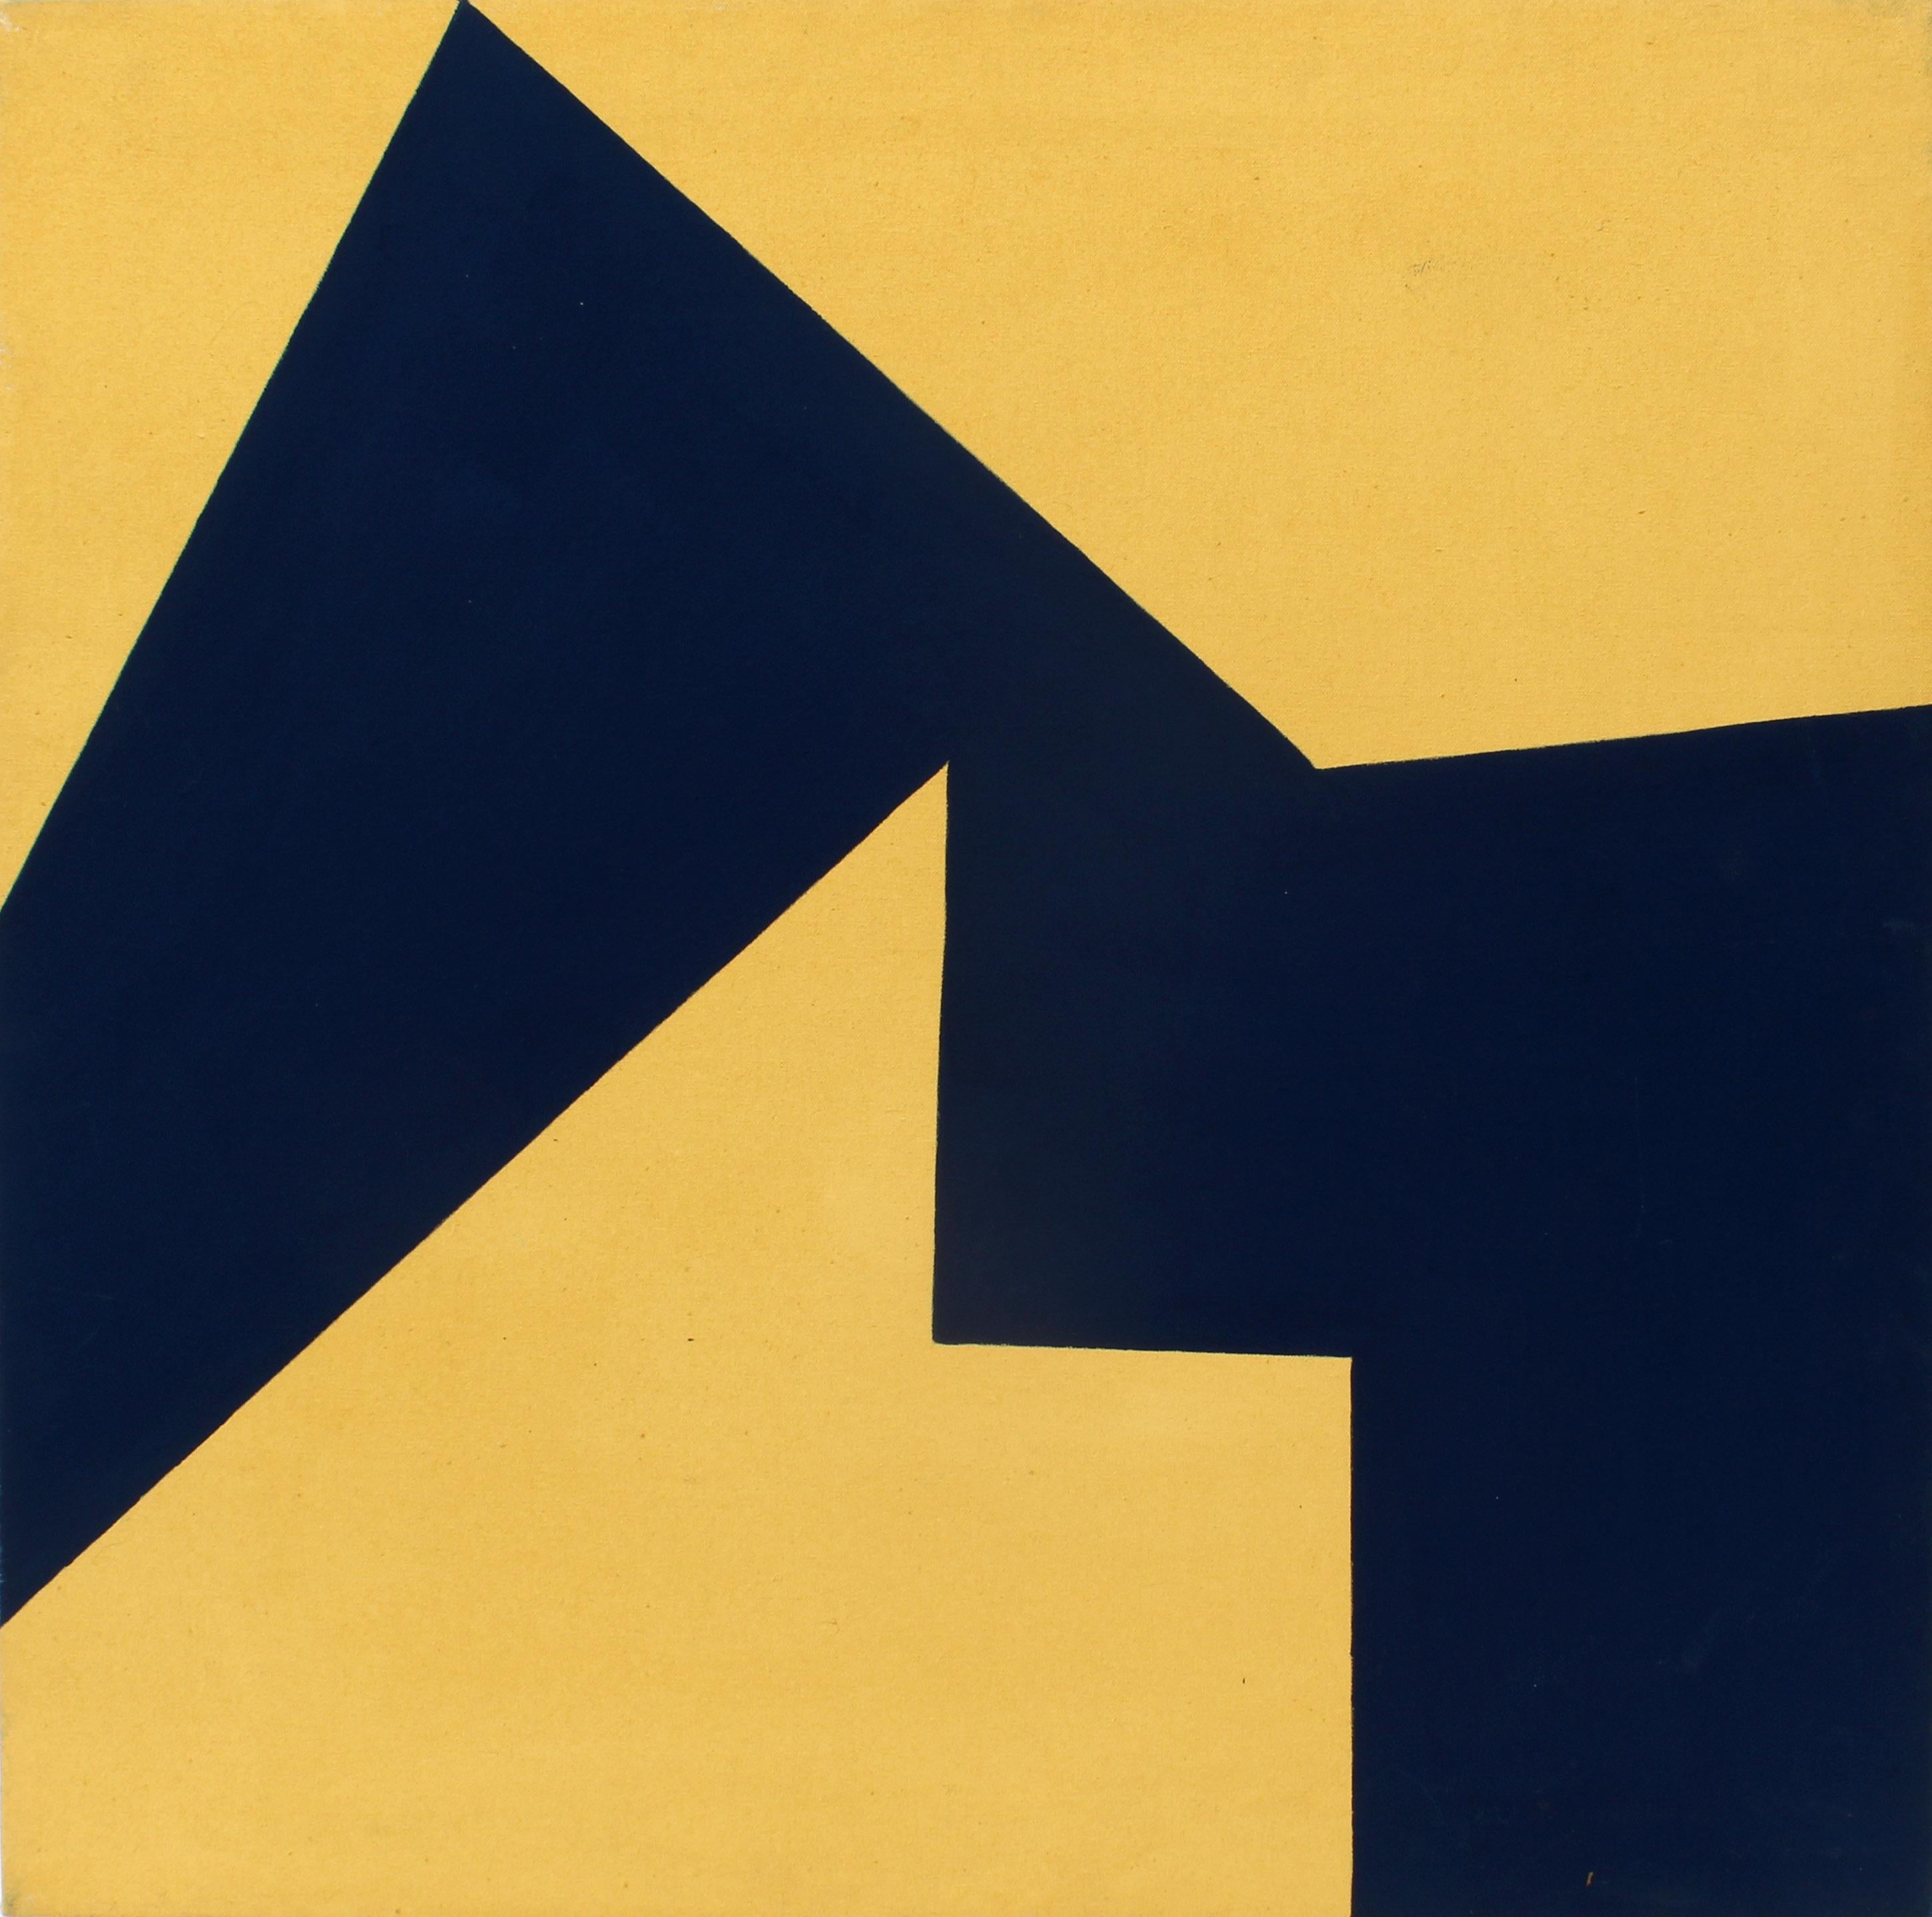 Minimalist Painting New York American Artist Female Yellow Blue 1975 - Black Abstract Painting by Martica Miguens